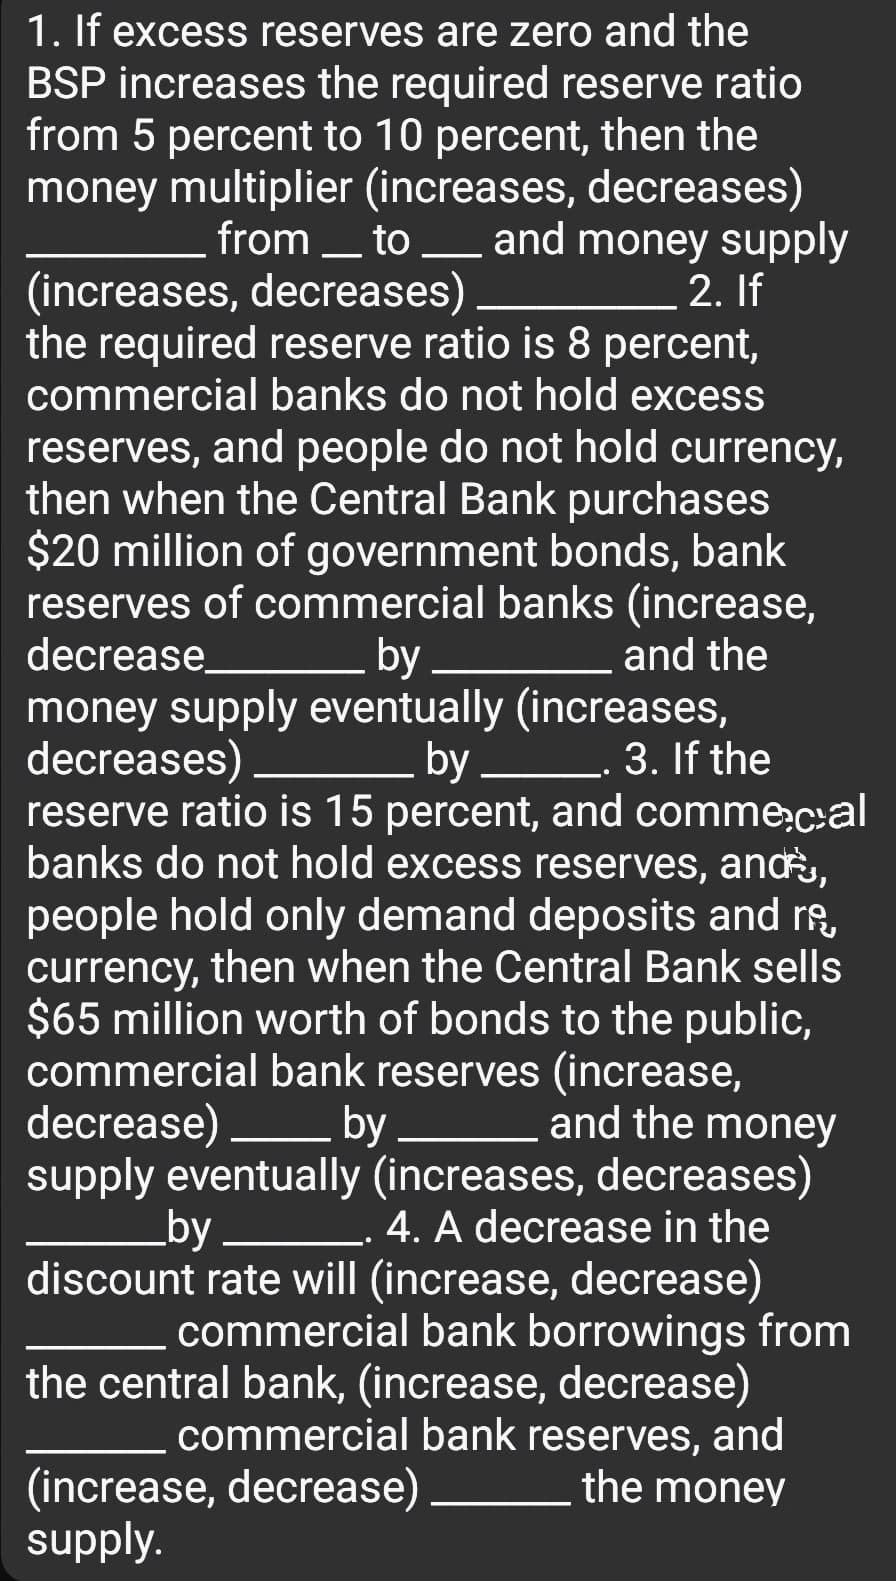 1. If excess reserves are zero and the
BSP increases the required reserve ratio
from 5 percent to 10 percent, then the
money multiplier (increases, decreases)
from _ to and money supply
(increases, decreases)
the required reserve ratio is 8 percent,
commercial banks do not hold excess
2. If
reserves, and people do not hold currency,
then when the Central Bank purchases
$20 million of government bonds, bank
reserves of commercial banks (increase,
and the
decrease
by
money supply eventually (increases,
by L. 3. If the
reserve ratio is 15 percent, and comme;c:al
banks do not hold excess reserves, an,
people hold only demand deposits and ro,
currency, then when the Central Bank sells
$65 million worth of bonds to the public,
commercial bank reserves (increase,
and the money
decreases)
decrease)
by
supply eventually (increases, decreases)
4. A decrease in the
discount rate will (increase, decrease)
commercial bank borrowings from
the central bank, (increase, decrease)
commercial bank reserves, and
the money
by
(increase, decrease)
supply.
